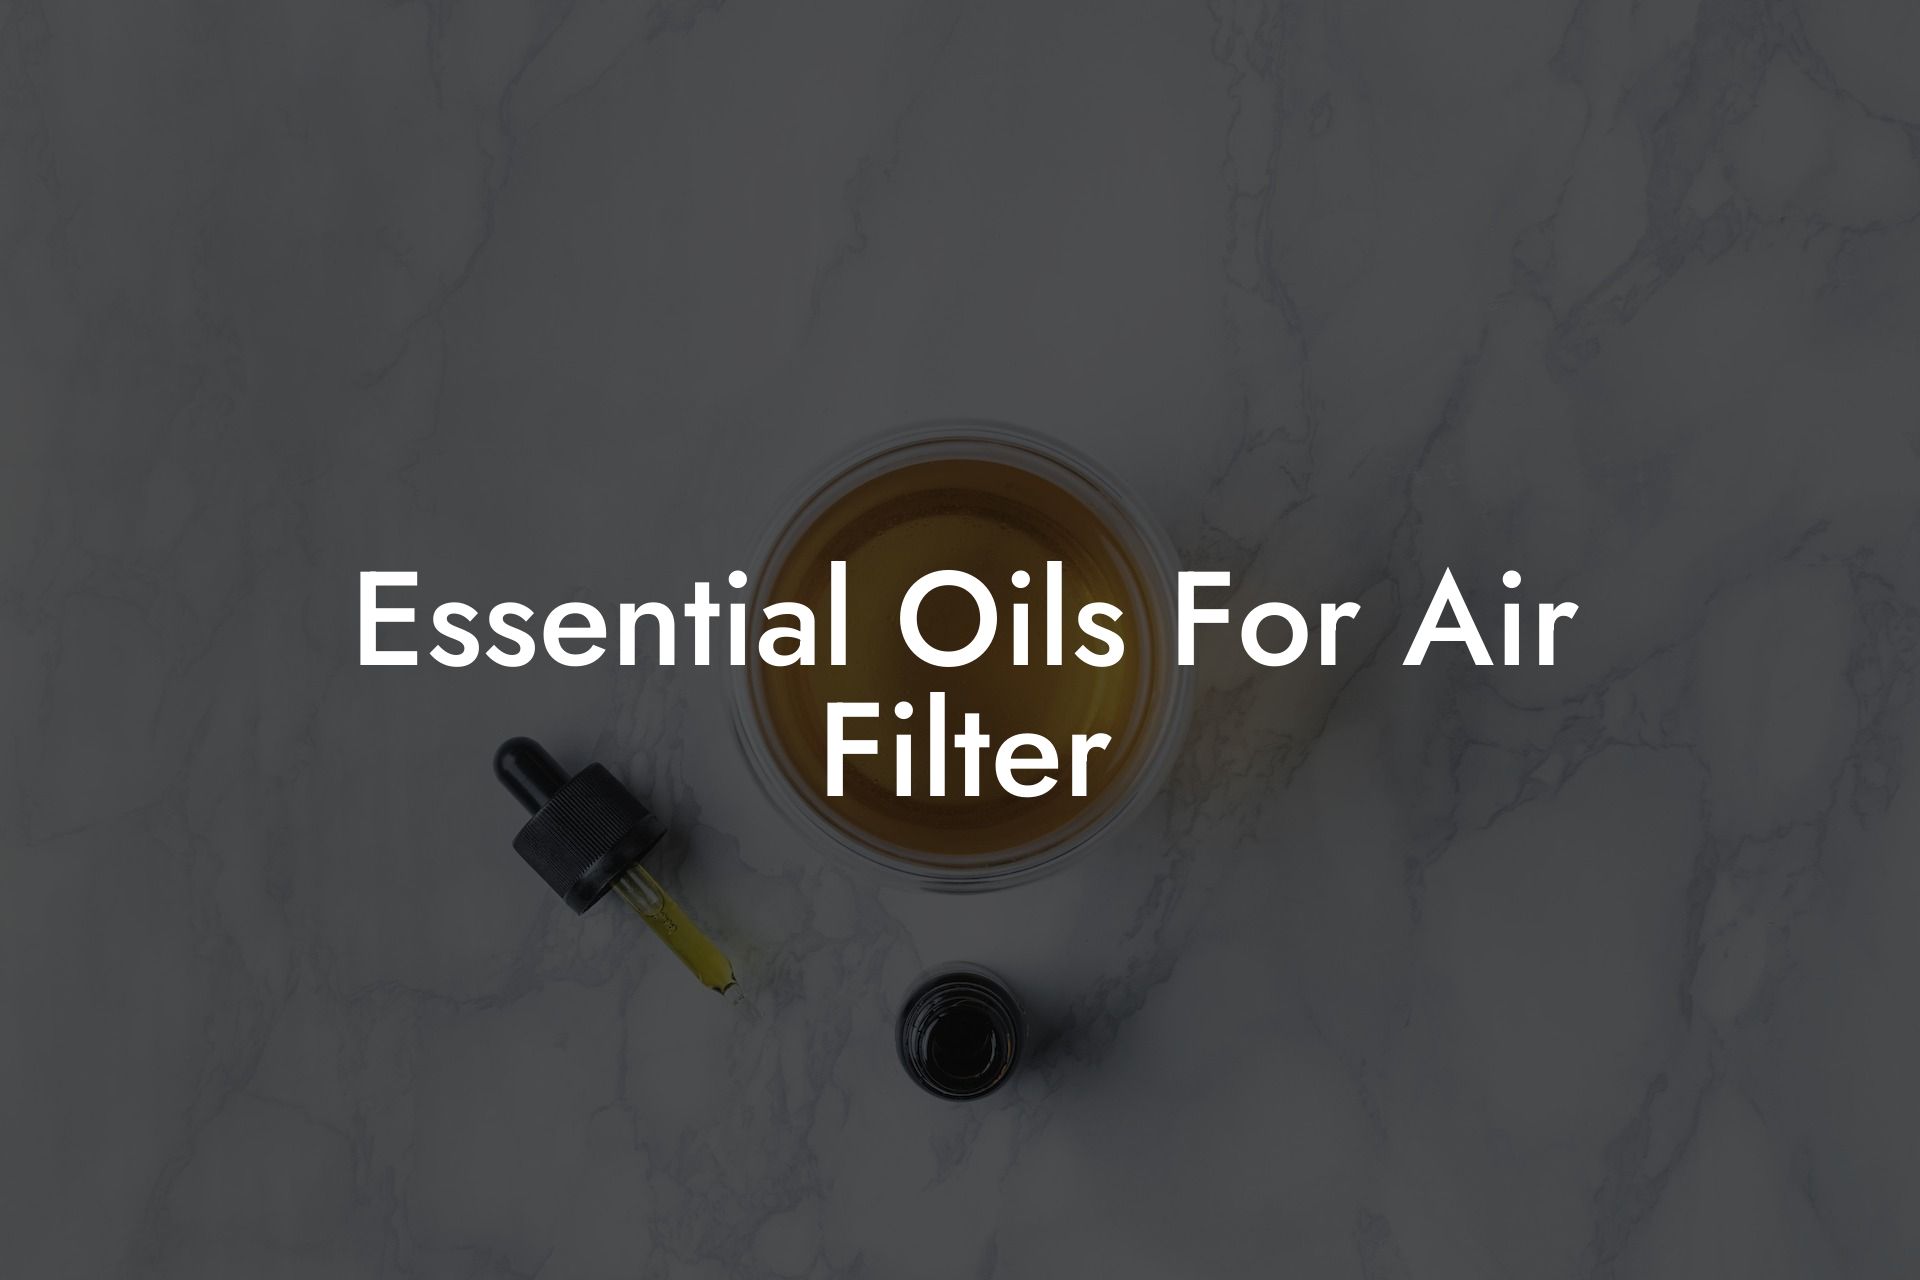 Essential Oils For Air Filter